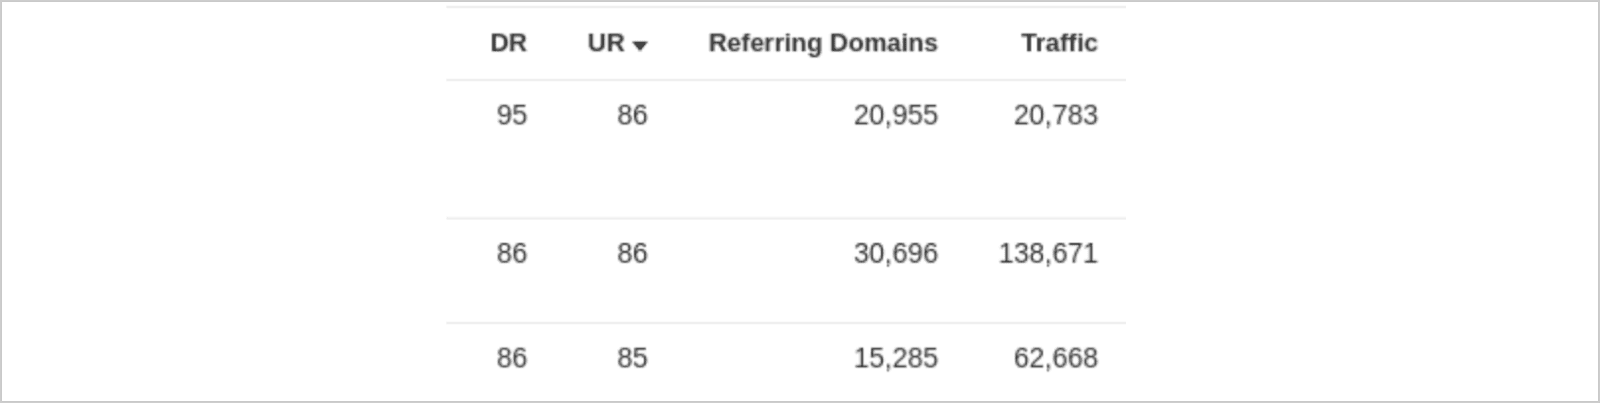 Referring domains